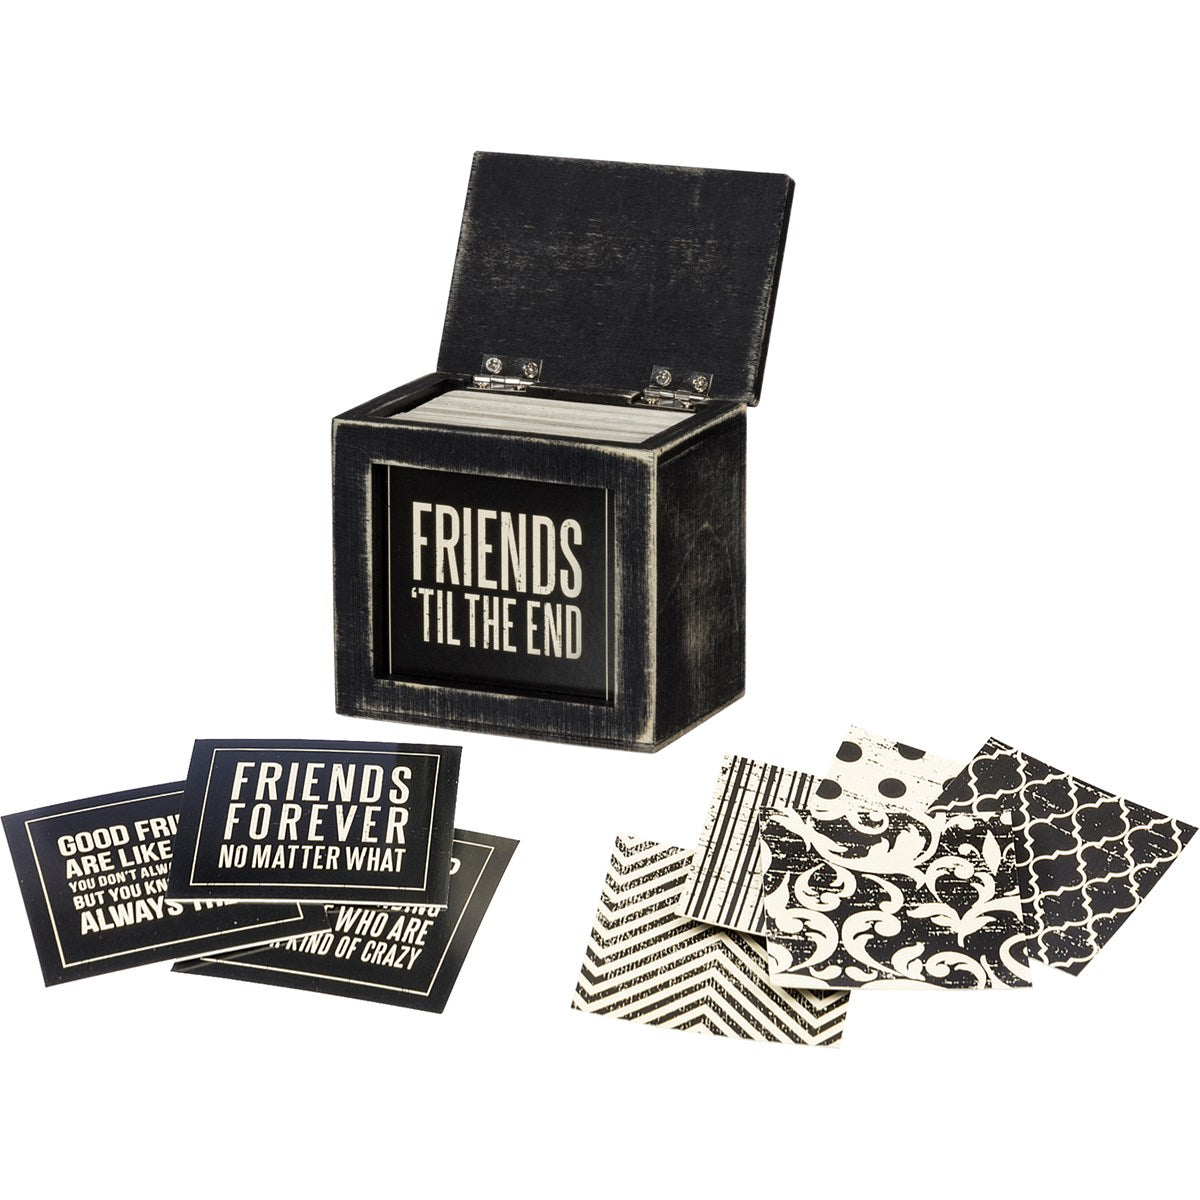 A black and white wooden hinged box with 80 double-sided friendship themed inspirational sayings.